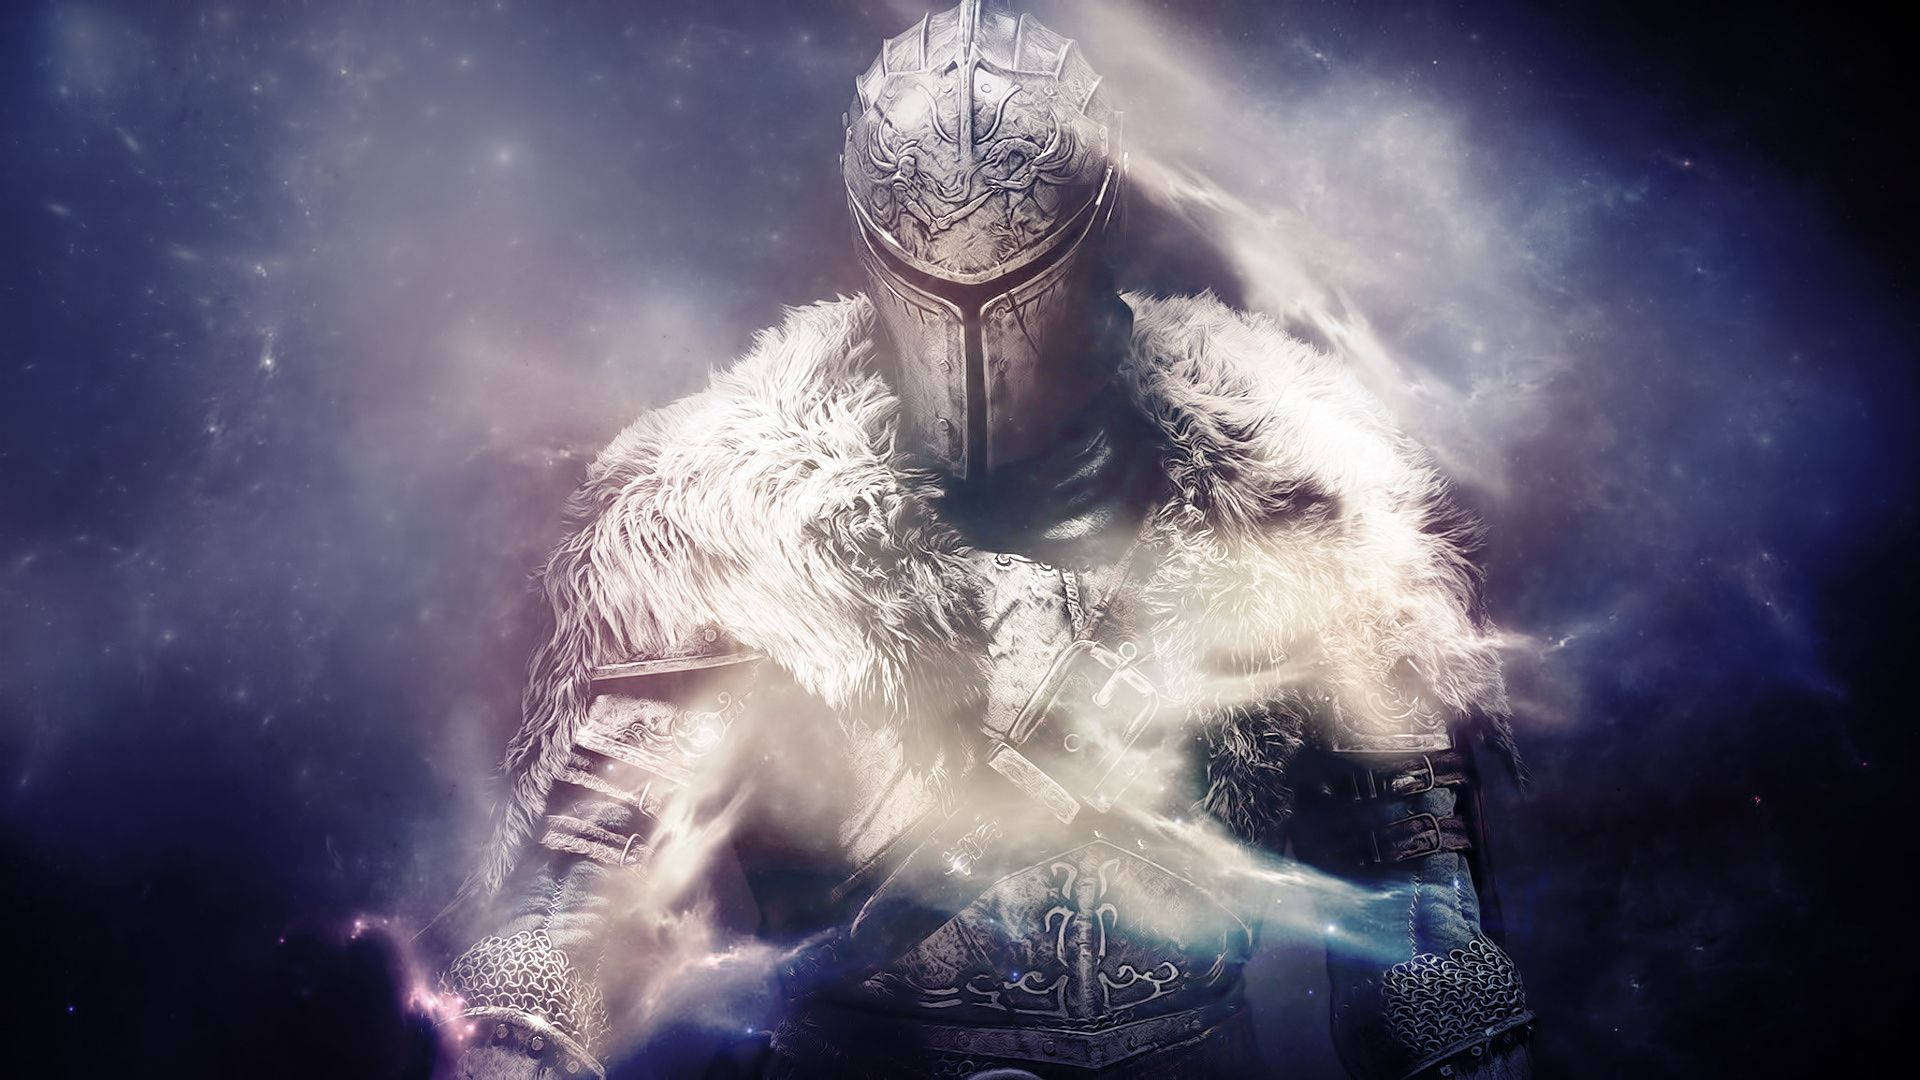 "Face your Fears - The Bearer of the Curse in Dark Souls II" Wallpaper